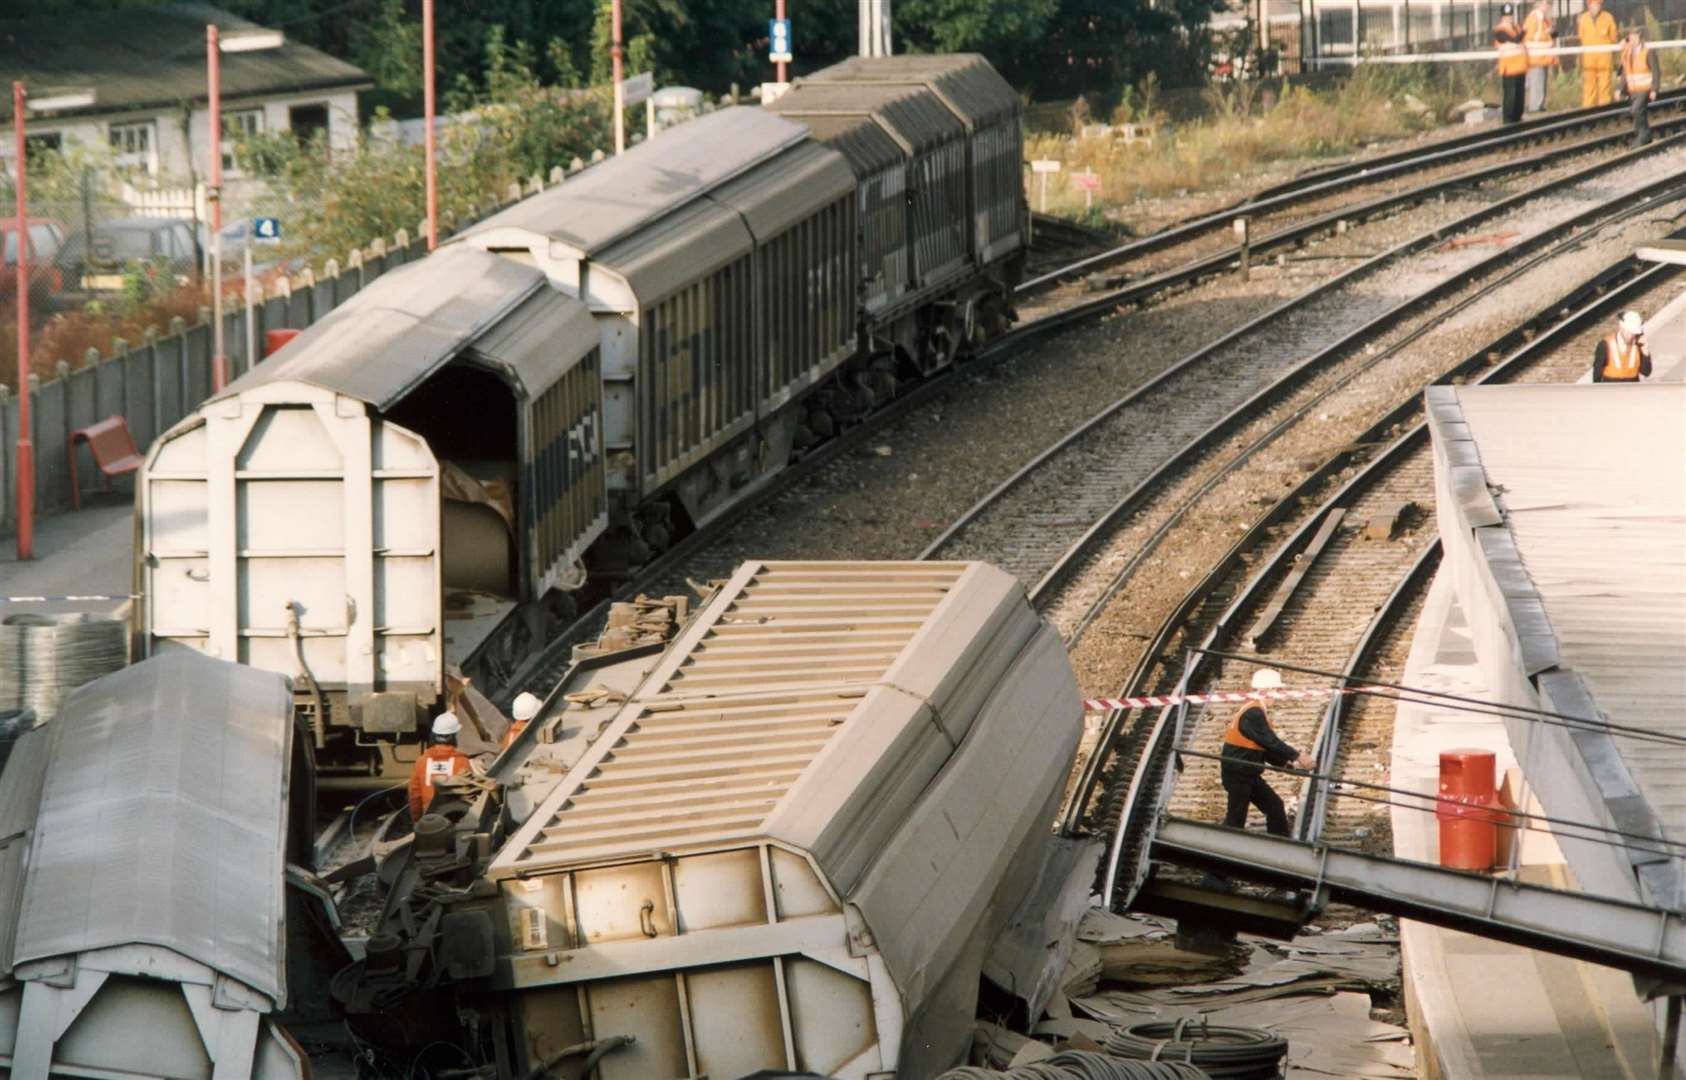 The aftermath of the Maidstone East train crash in 1993